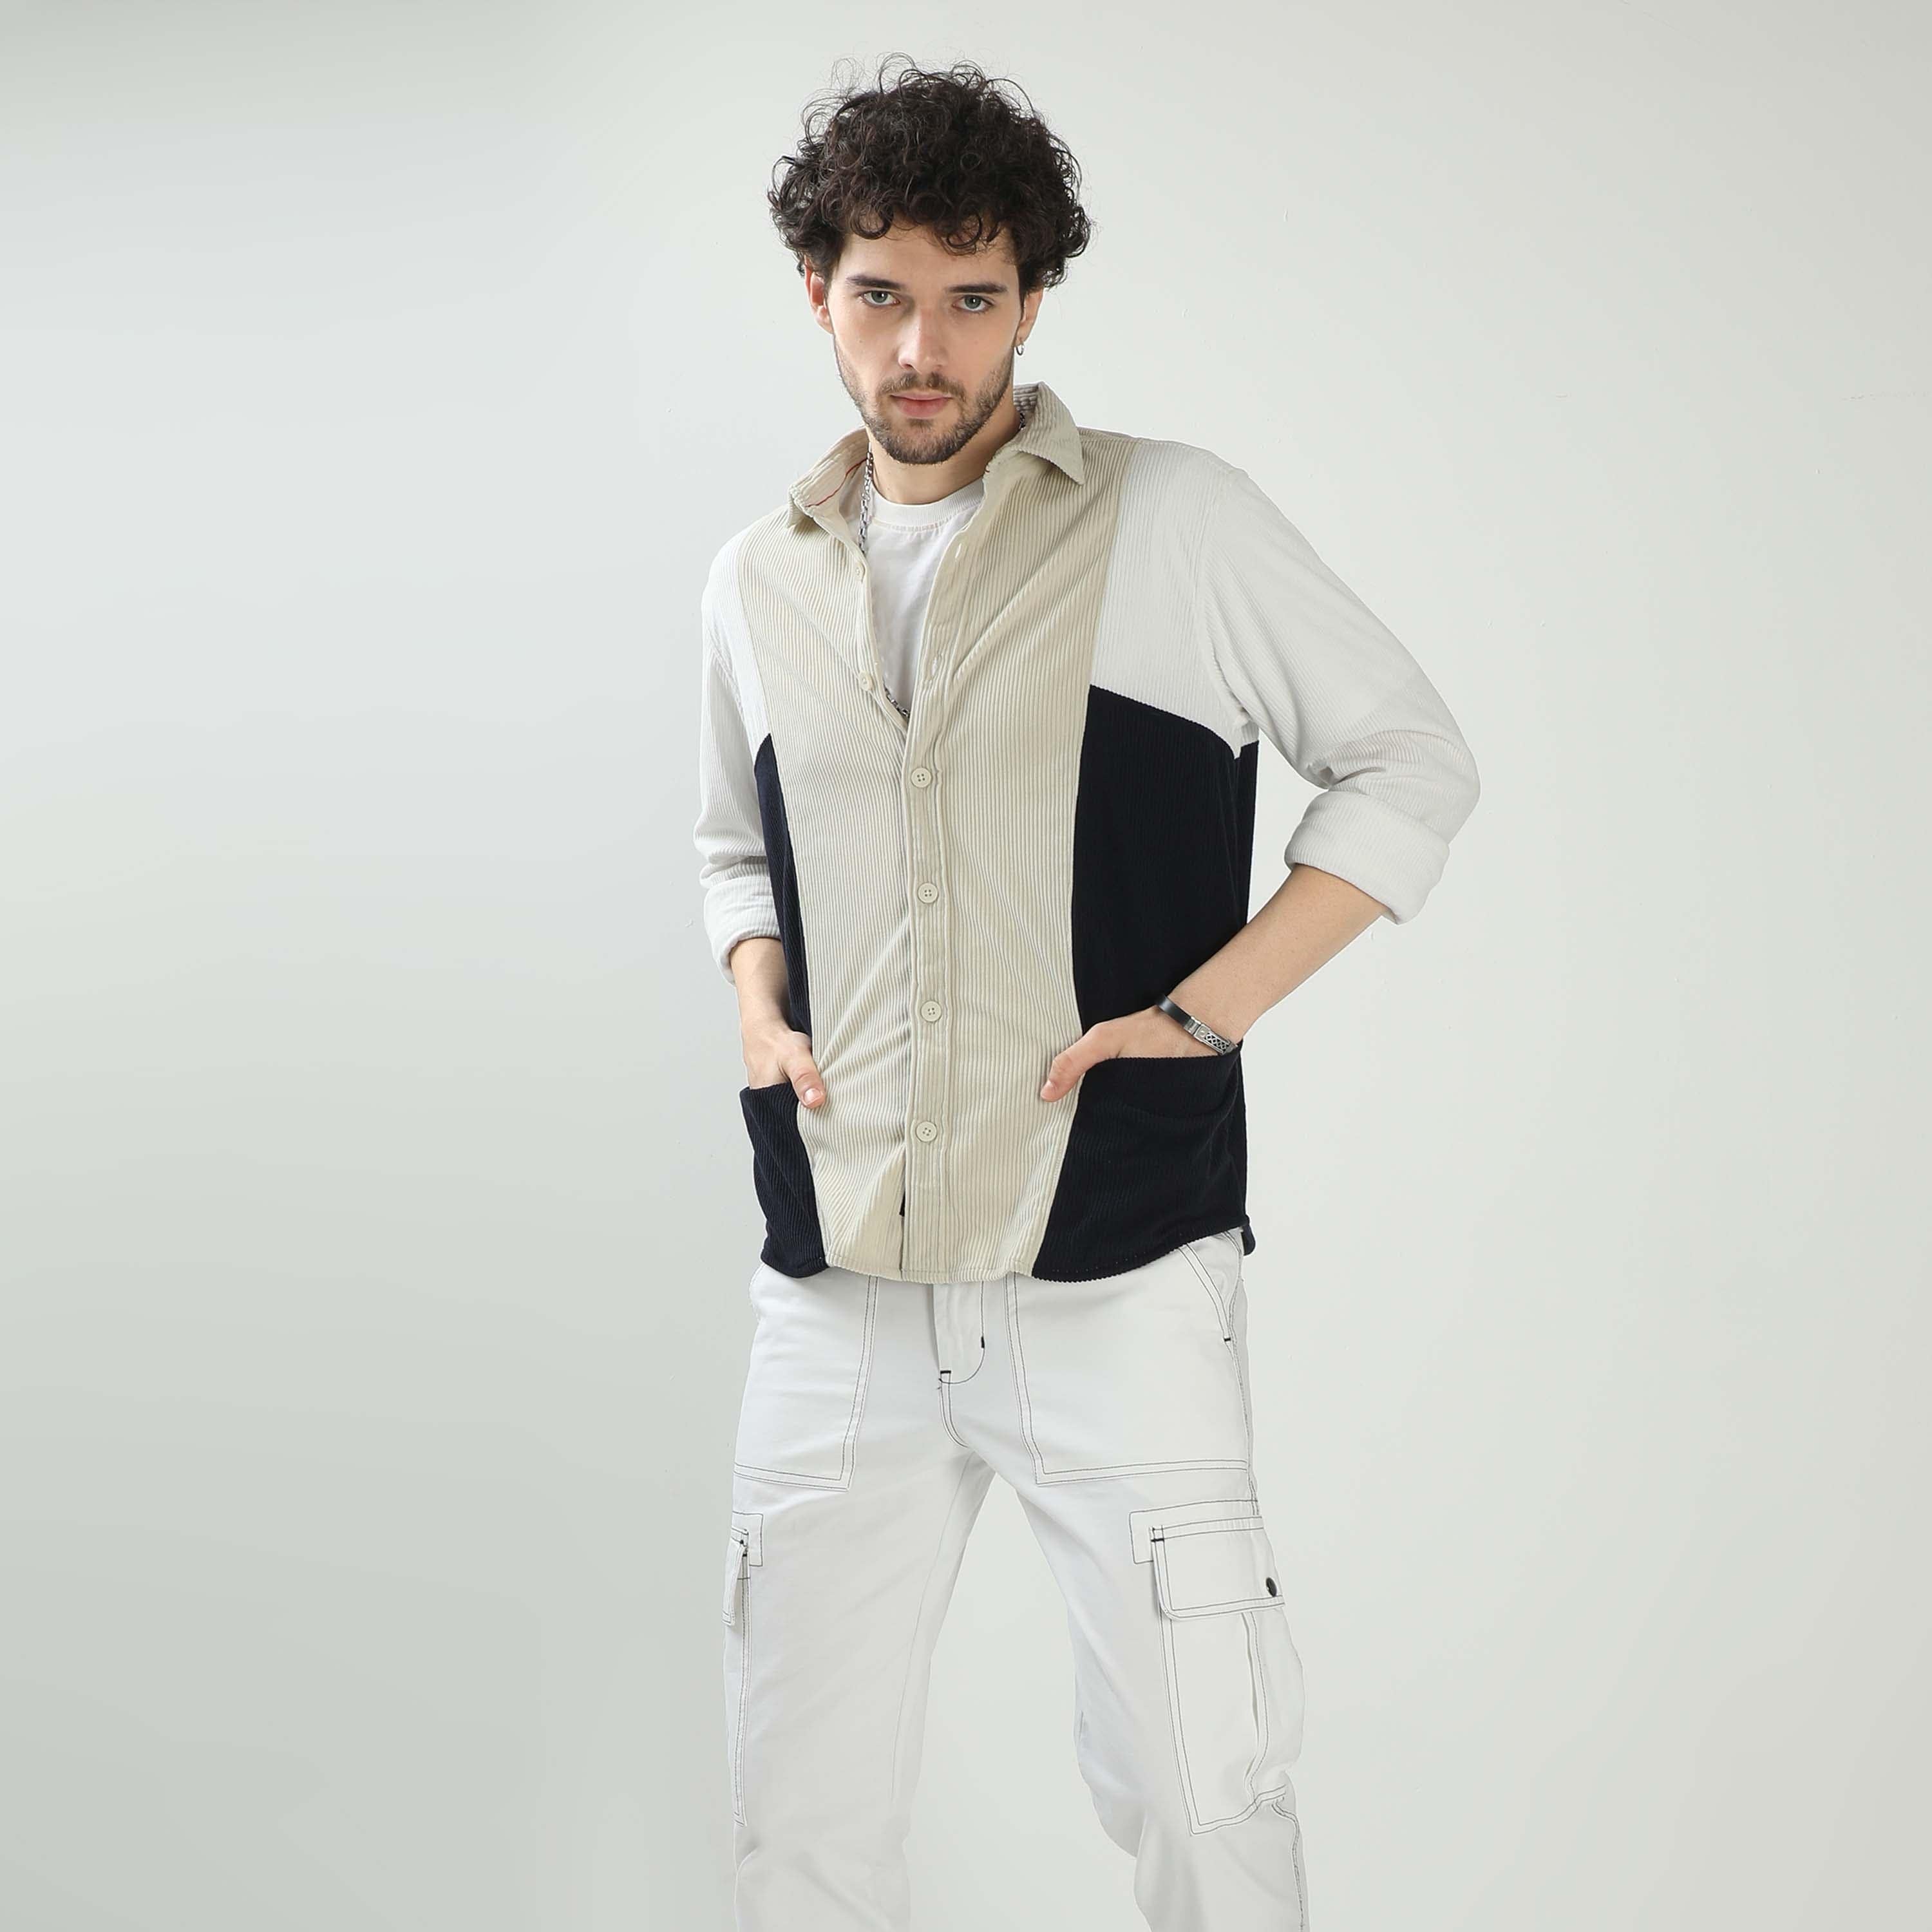 Buy Stylish White And Navy Tricolor Shacket for MenRs. 1599.00